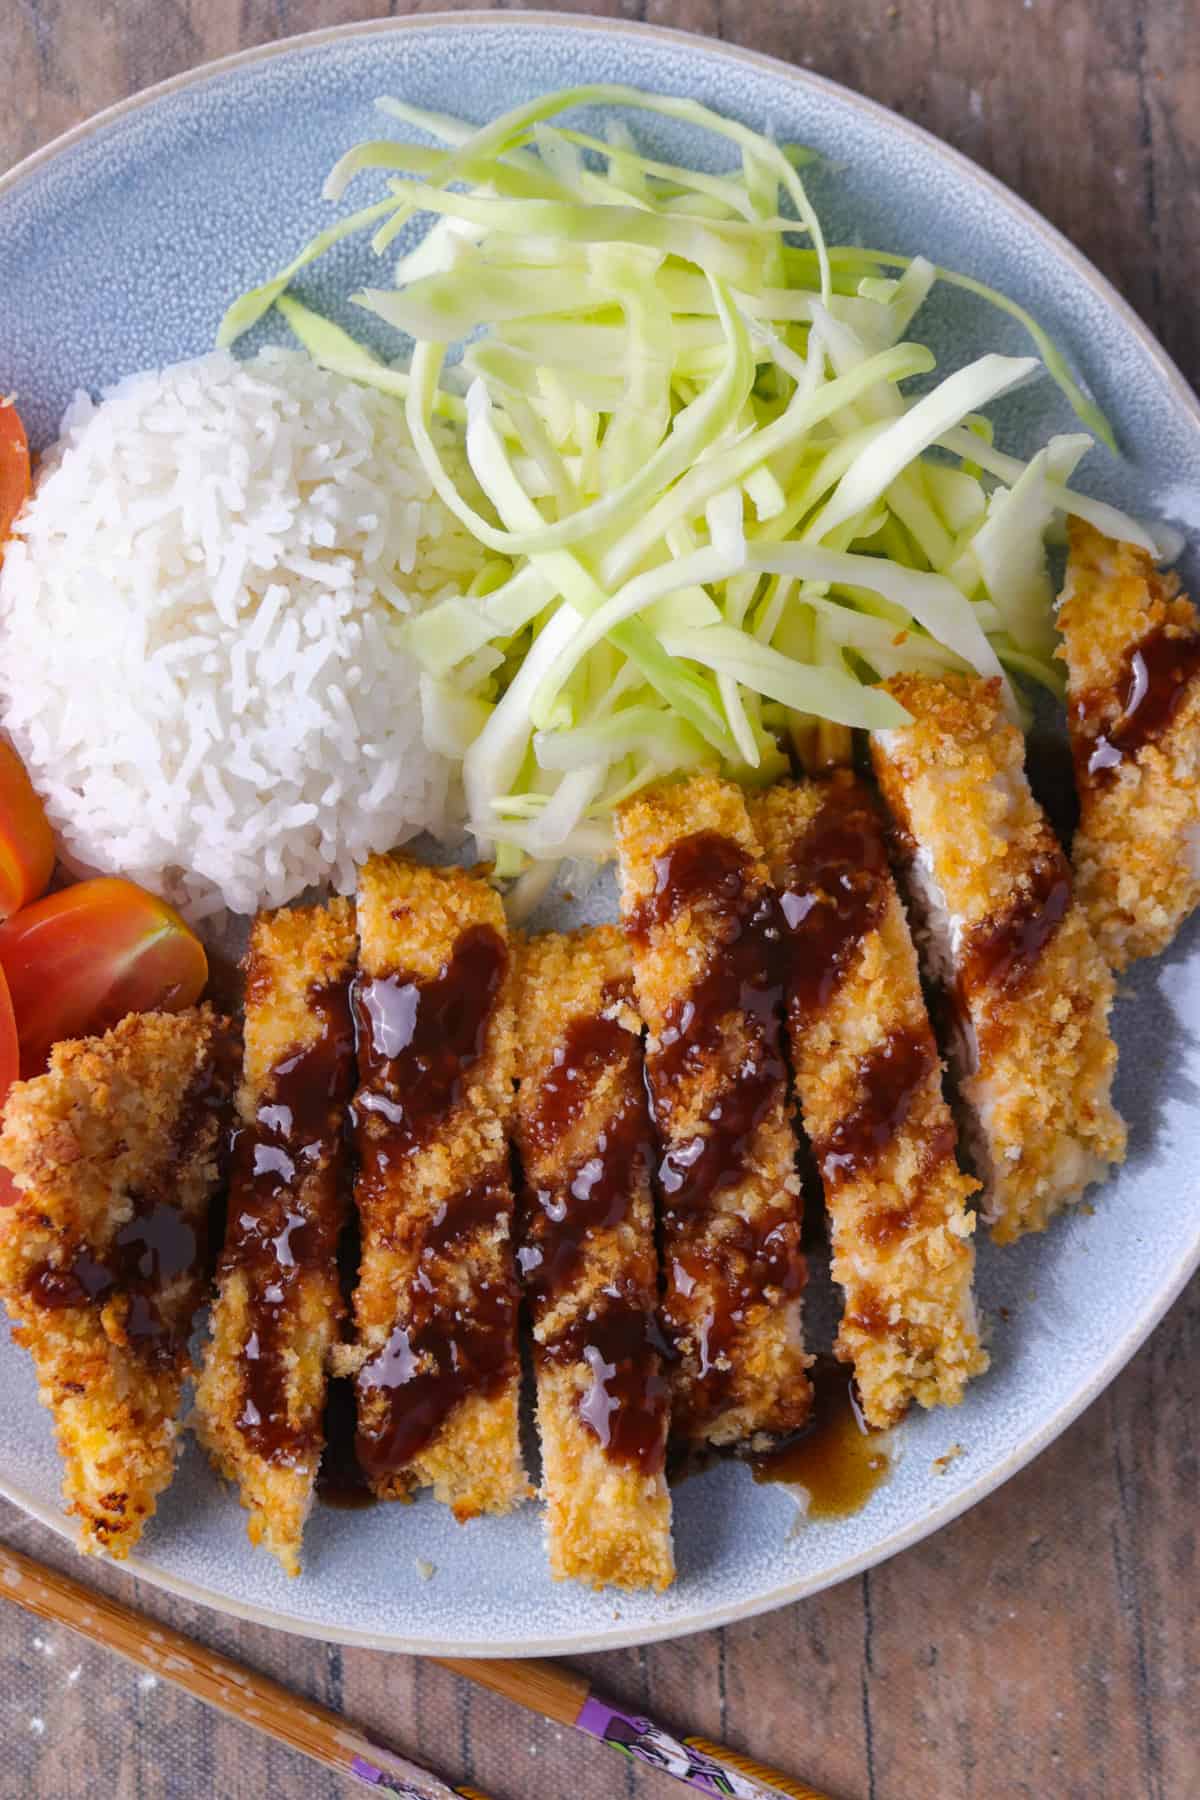 Chicken katsu served in a plate with cabbage, tomatoes and rice.